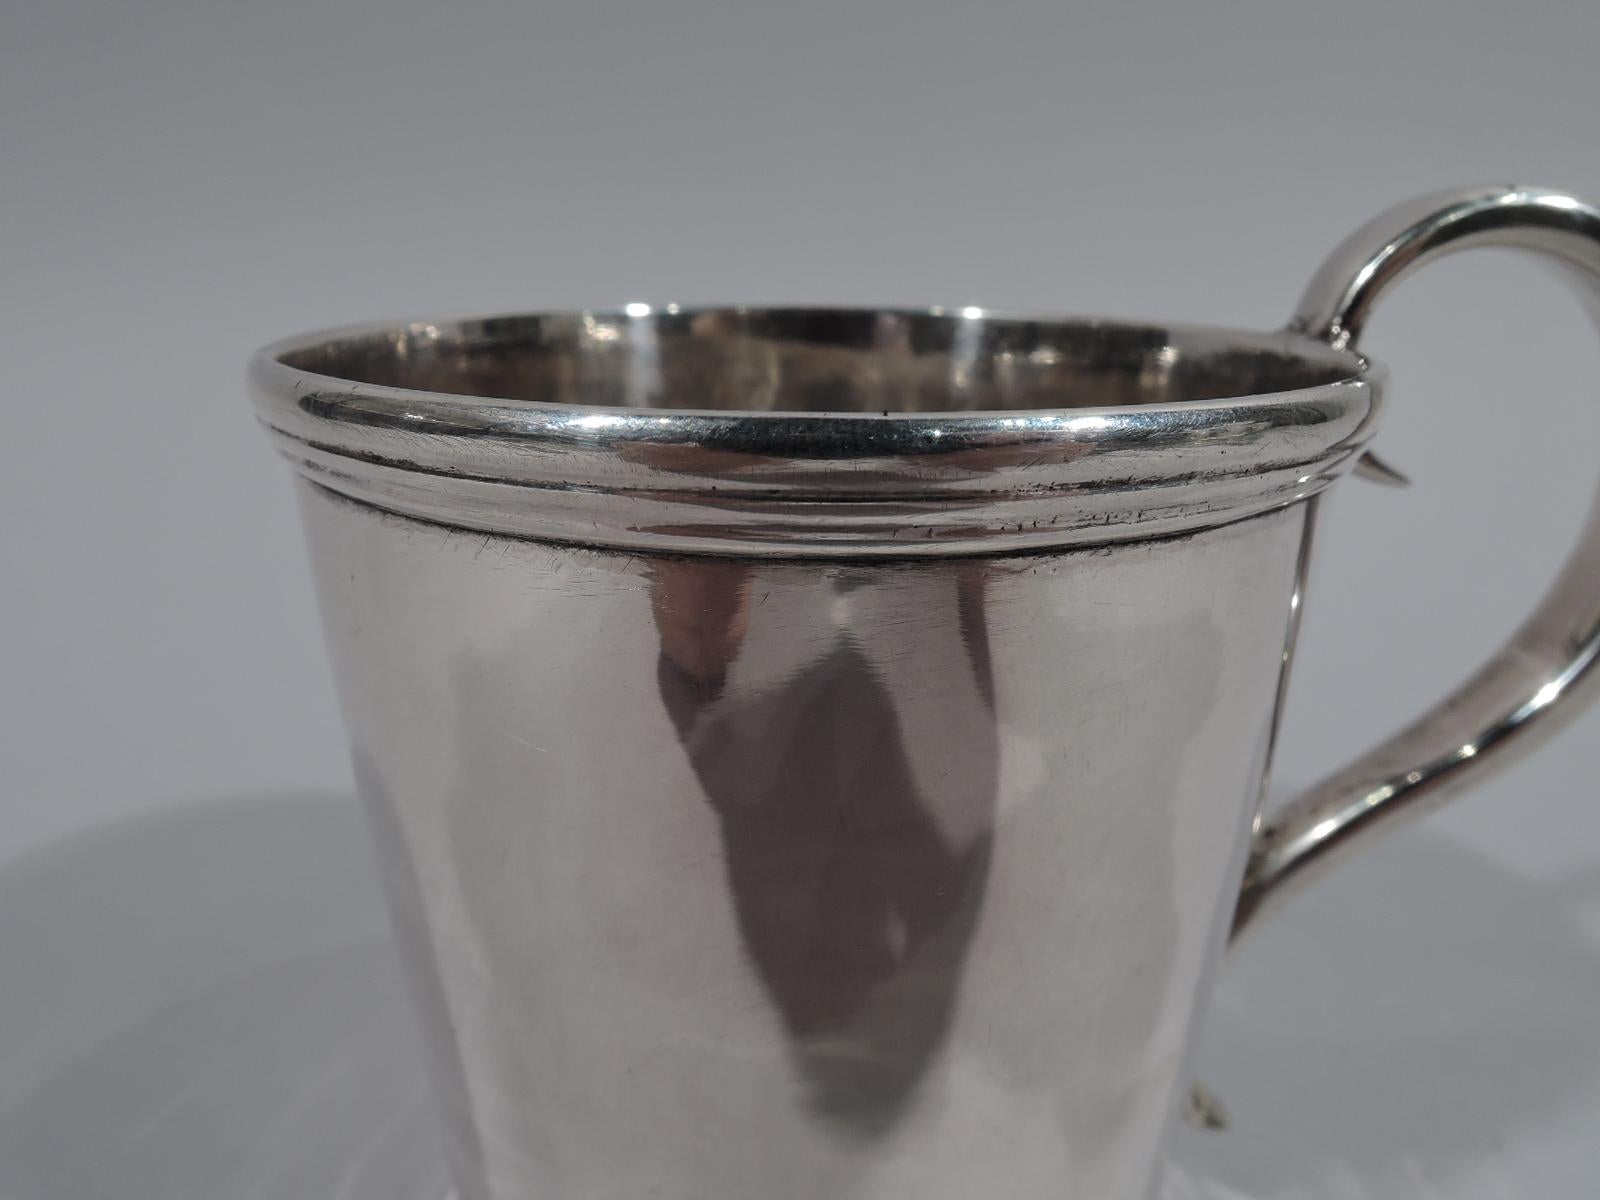 American classical coin silver baby cup. Straight and tapering sides, reeded rim and base, and S-scroll handle. Lots of room for engraving. Fully marked including phrase “Pure Silver Coin” and retailer’s stamp for Lincoln & Reed, who were active in